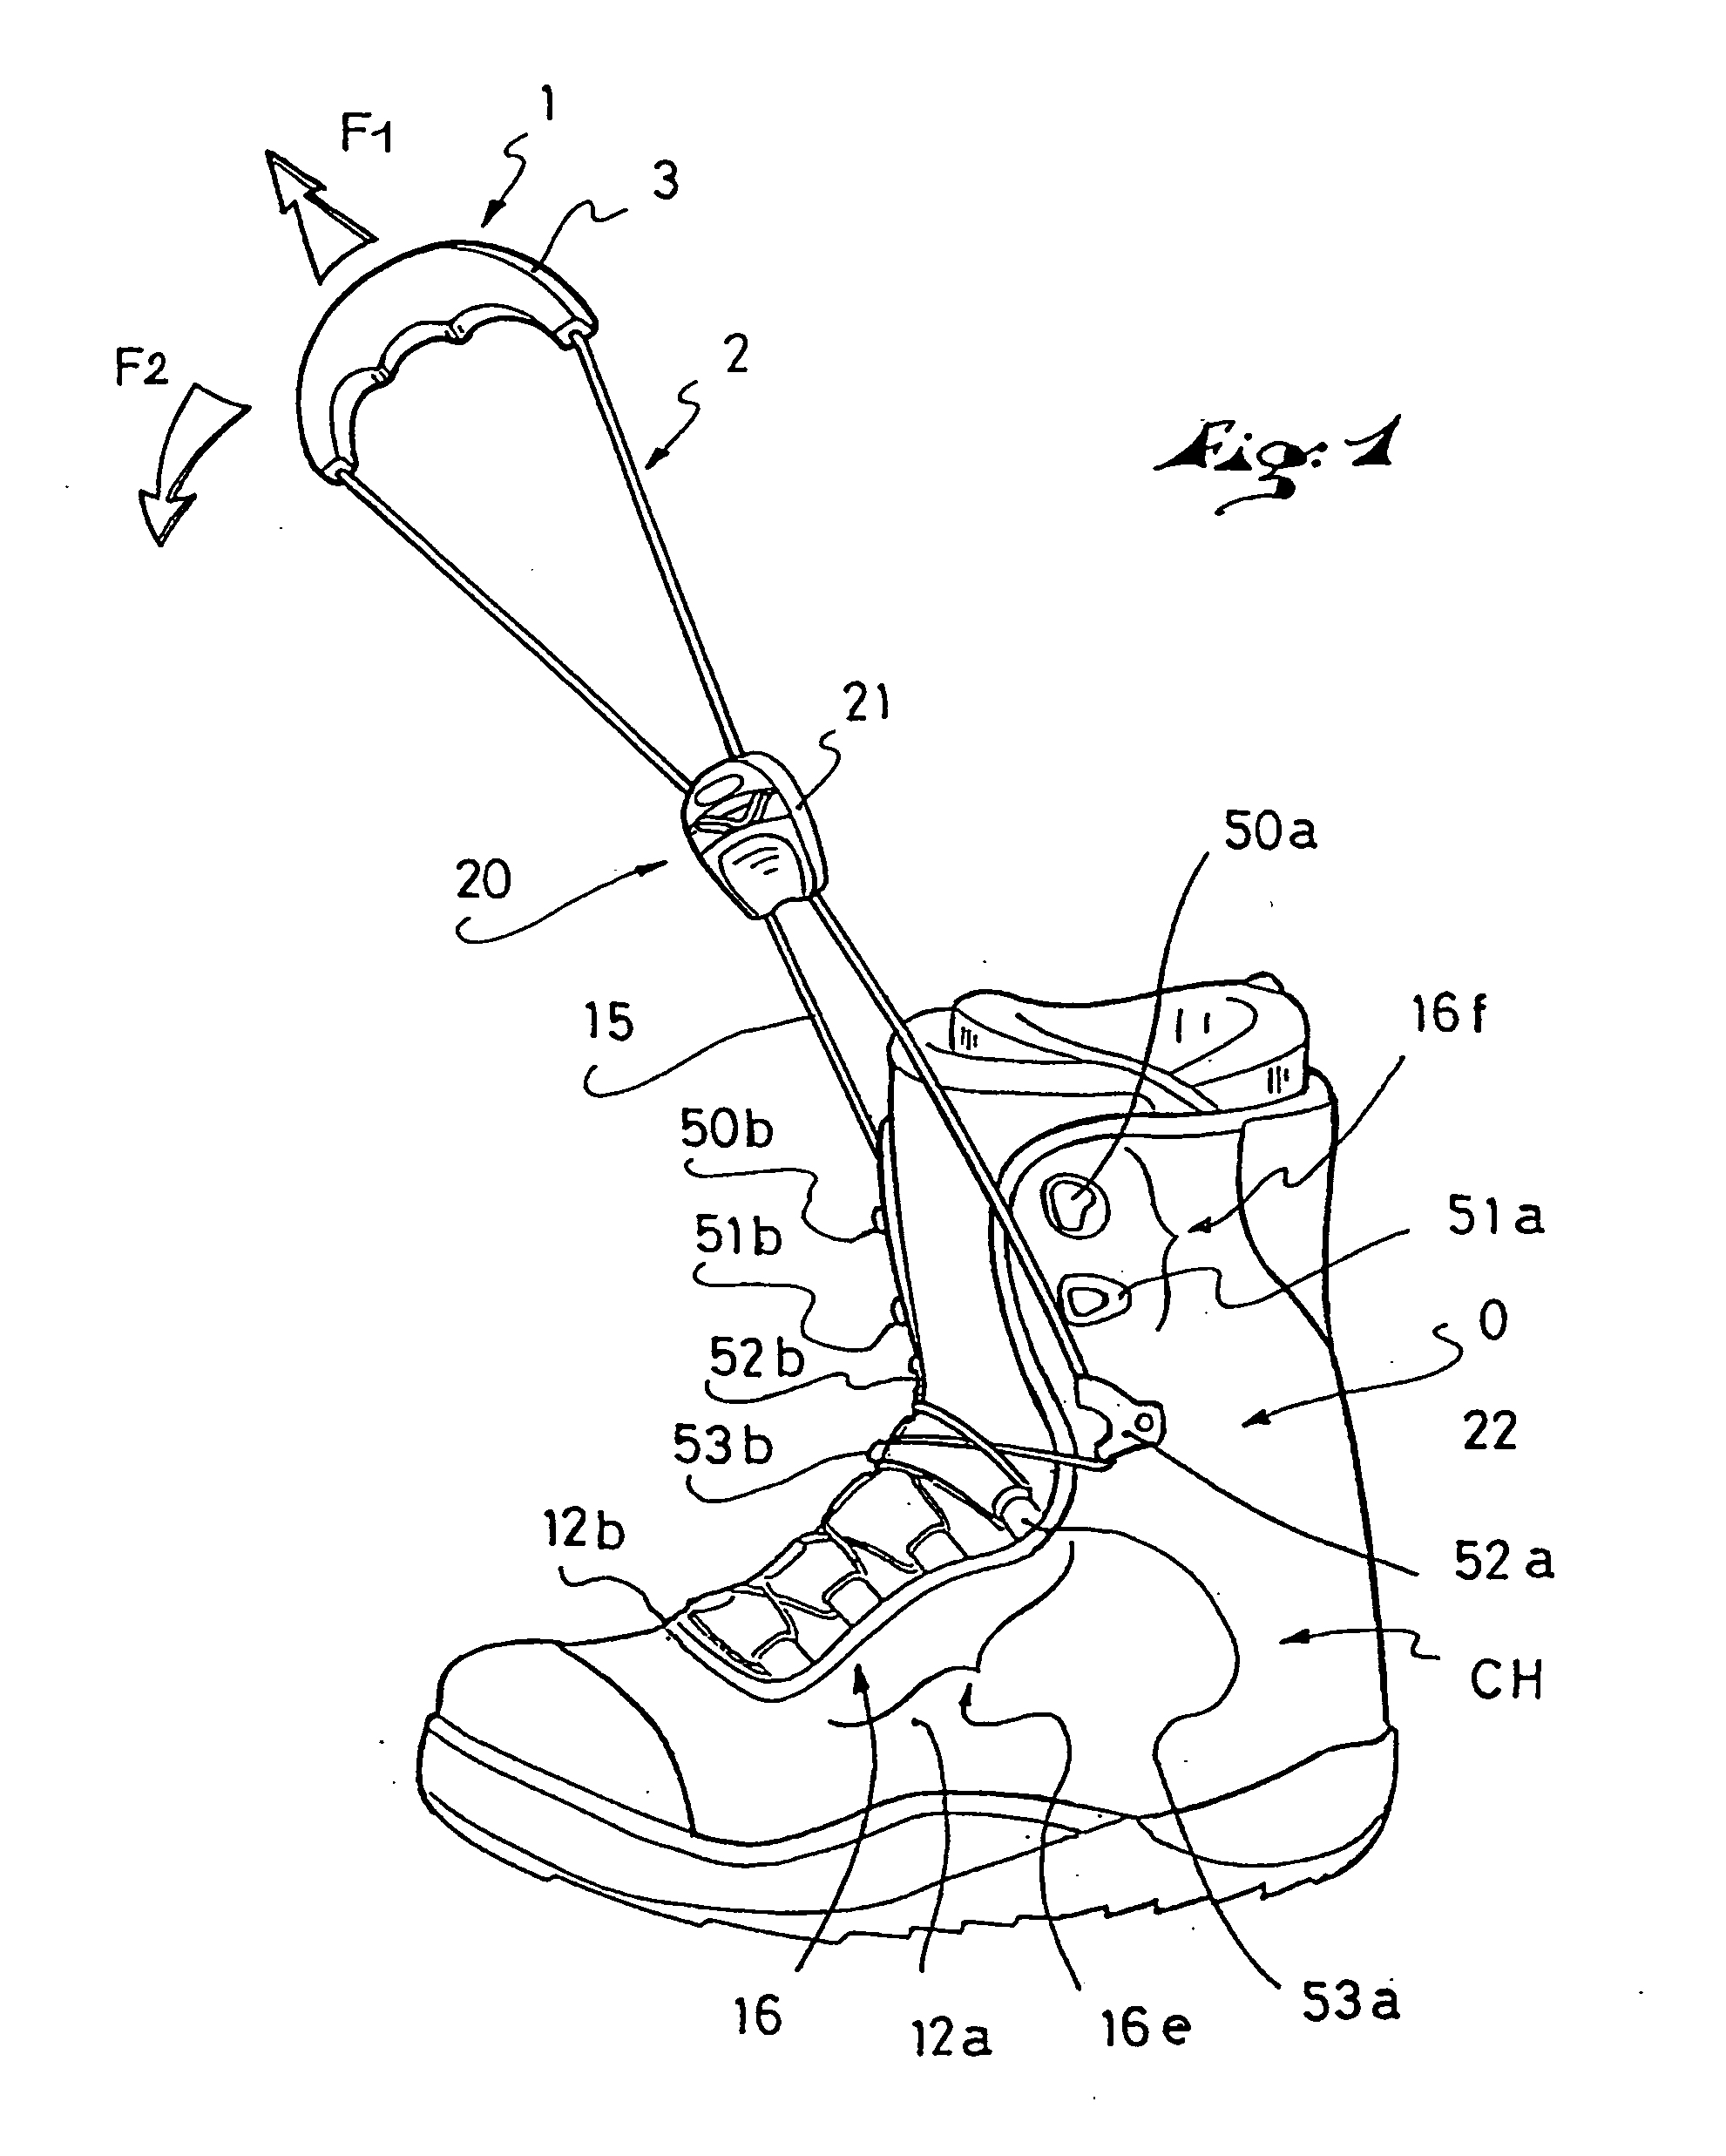 Article of footwear with linkage-tightening device